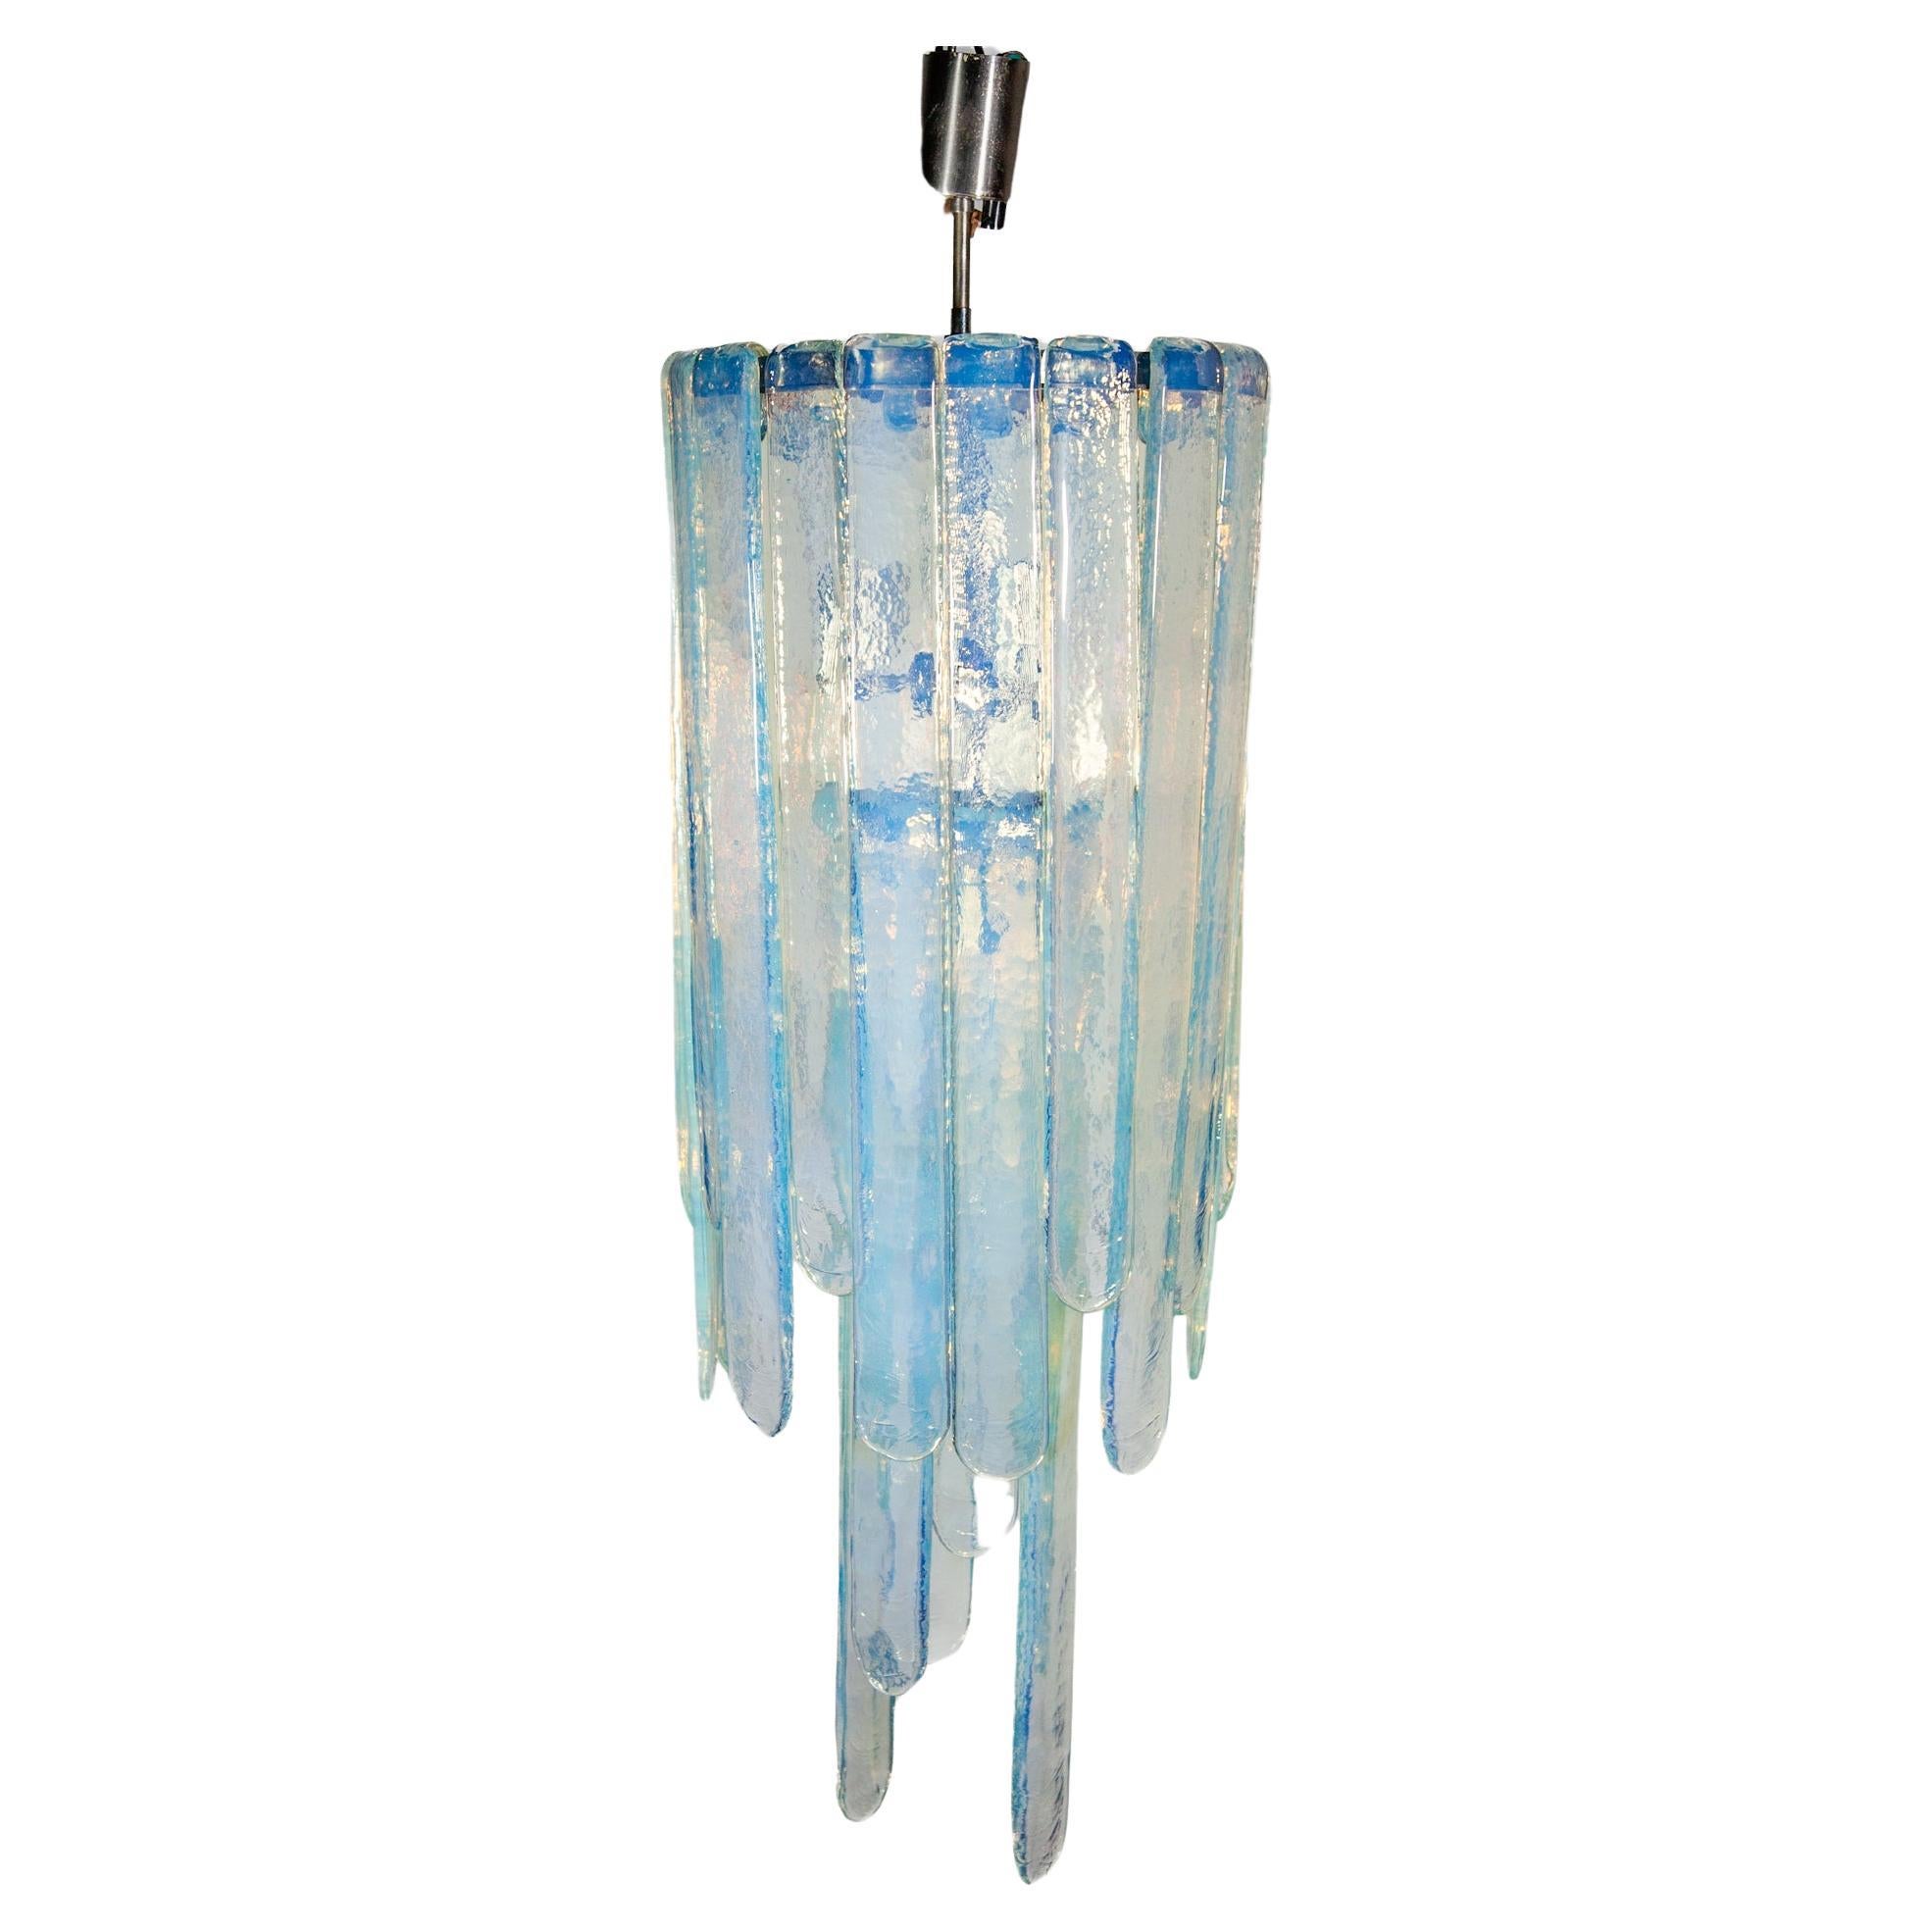 Vintage modern opalescent glass chandelier designed by Carlo Nason for Mazzega, Italy, 1960s in a blue opalescent art glass, consisting of three lengths of glass blades. It measures 98 cm tall in its current composition, but can be made longer or